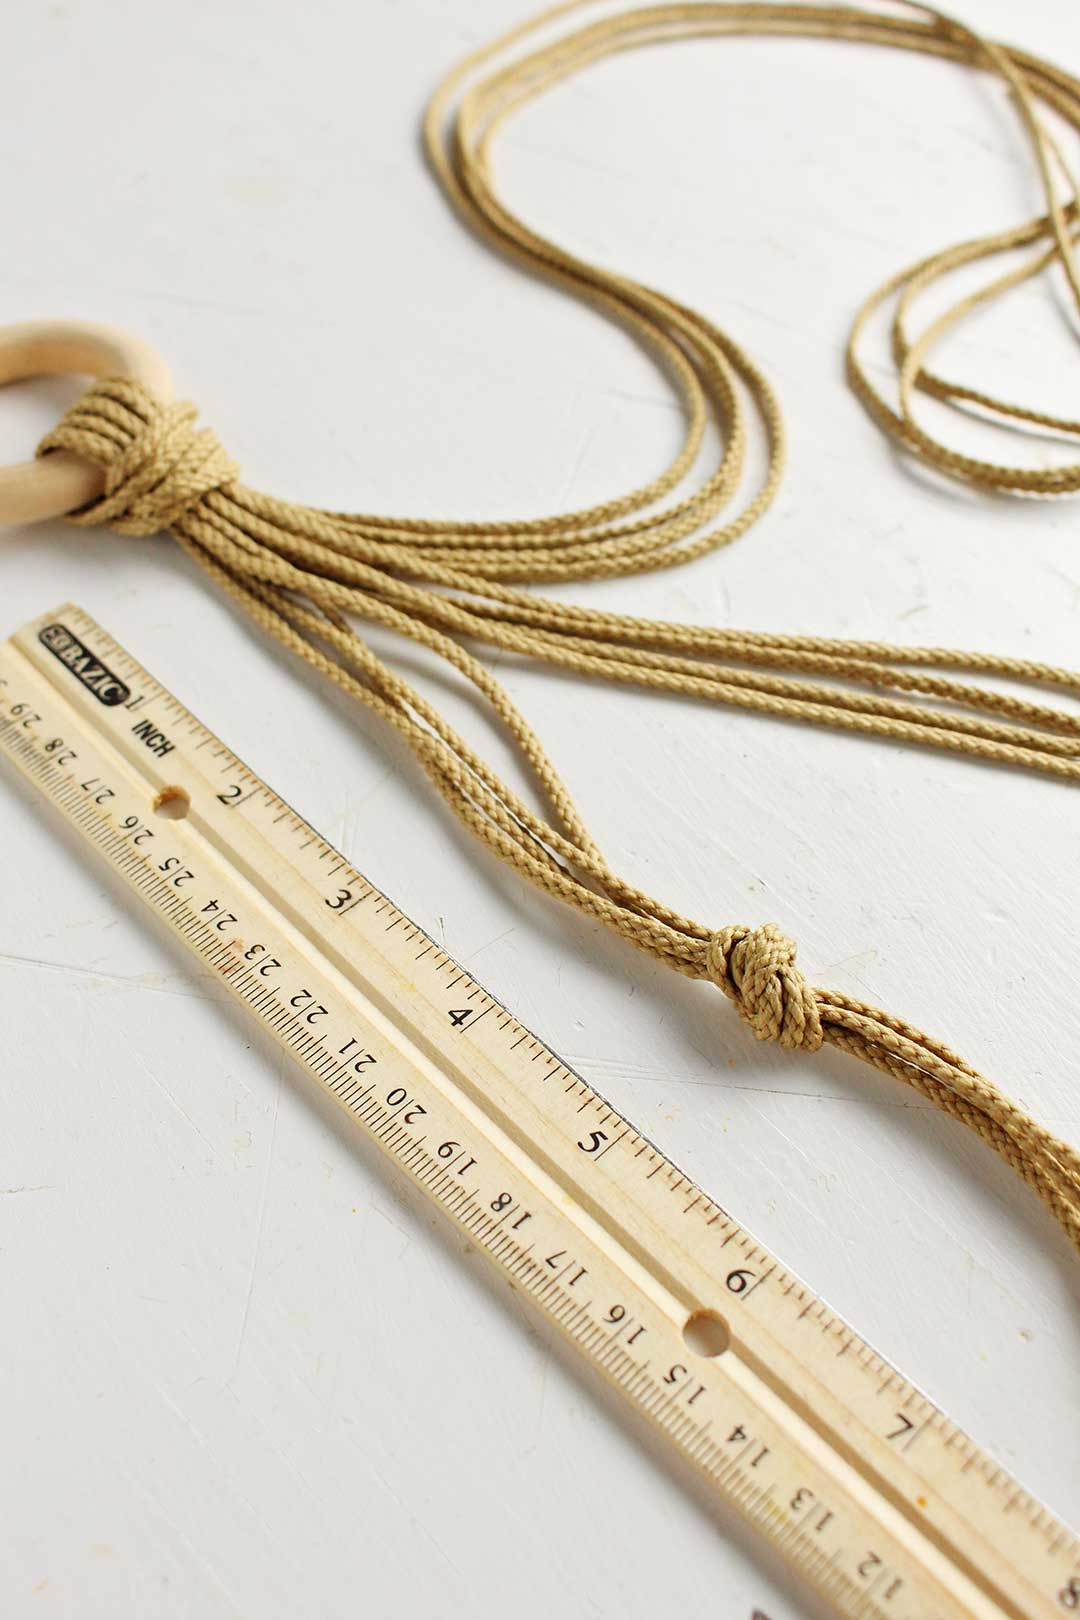 Ruler and rope showing the first knot of the macrame plant hanger.